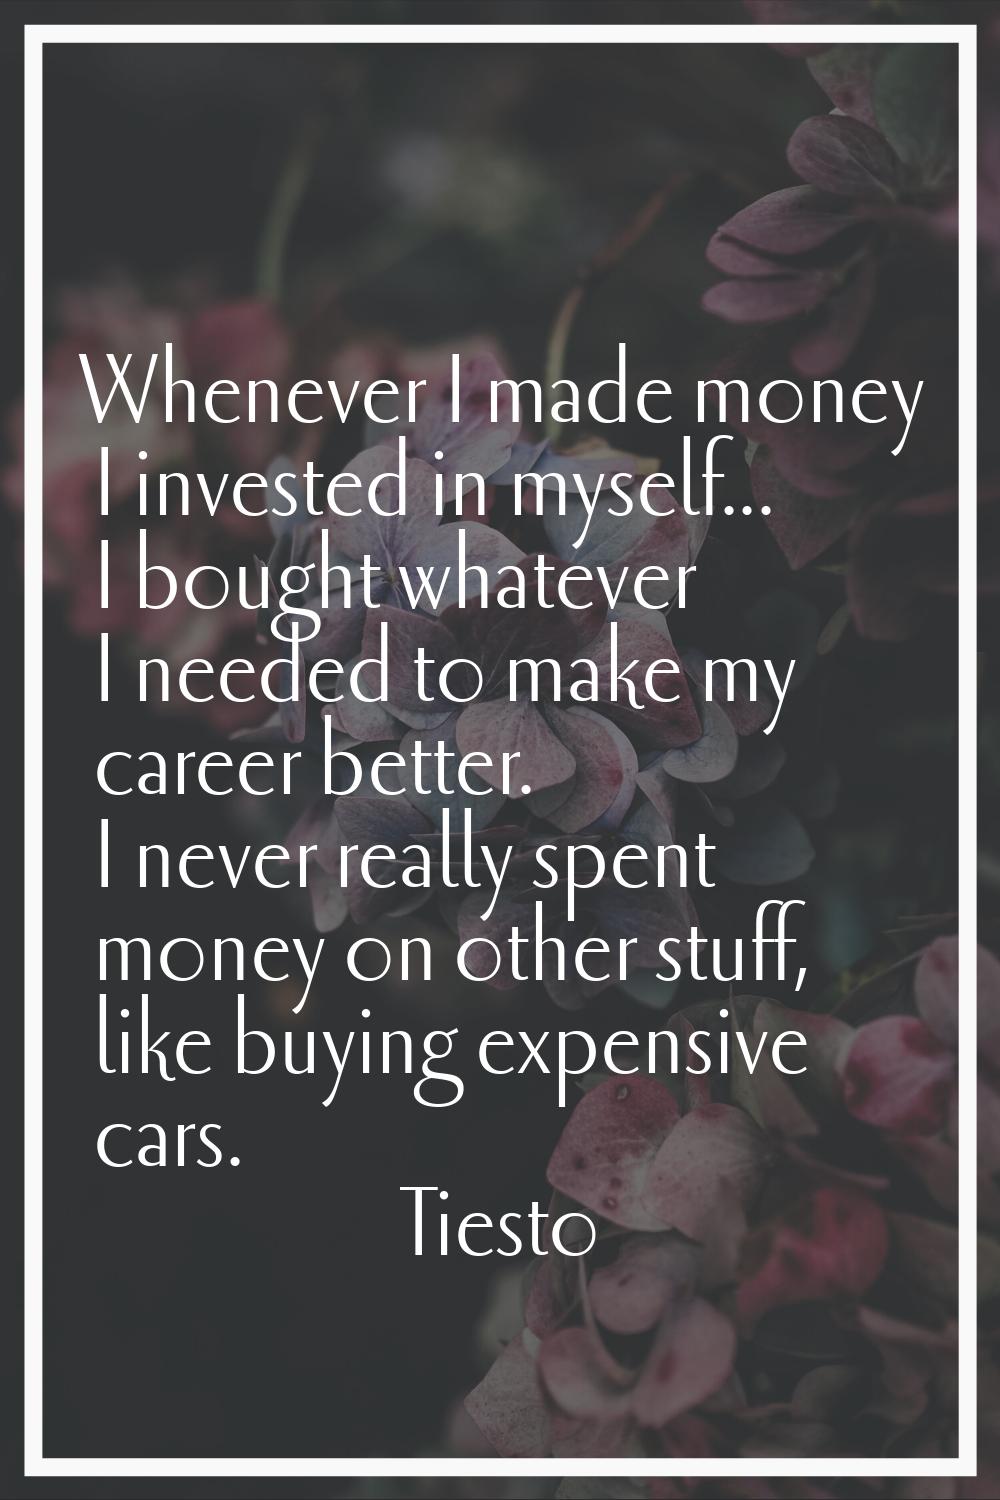 Whenever I made money I invested in myself... I bought whatever I needed to make my career better. 